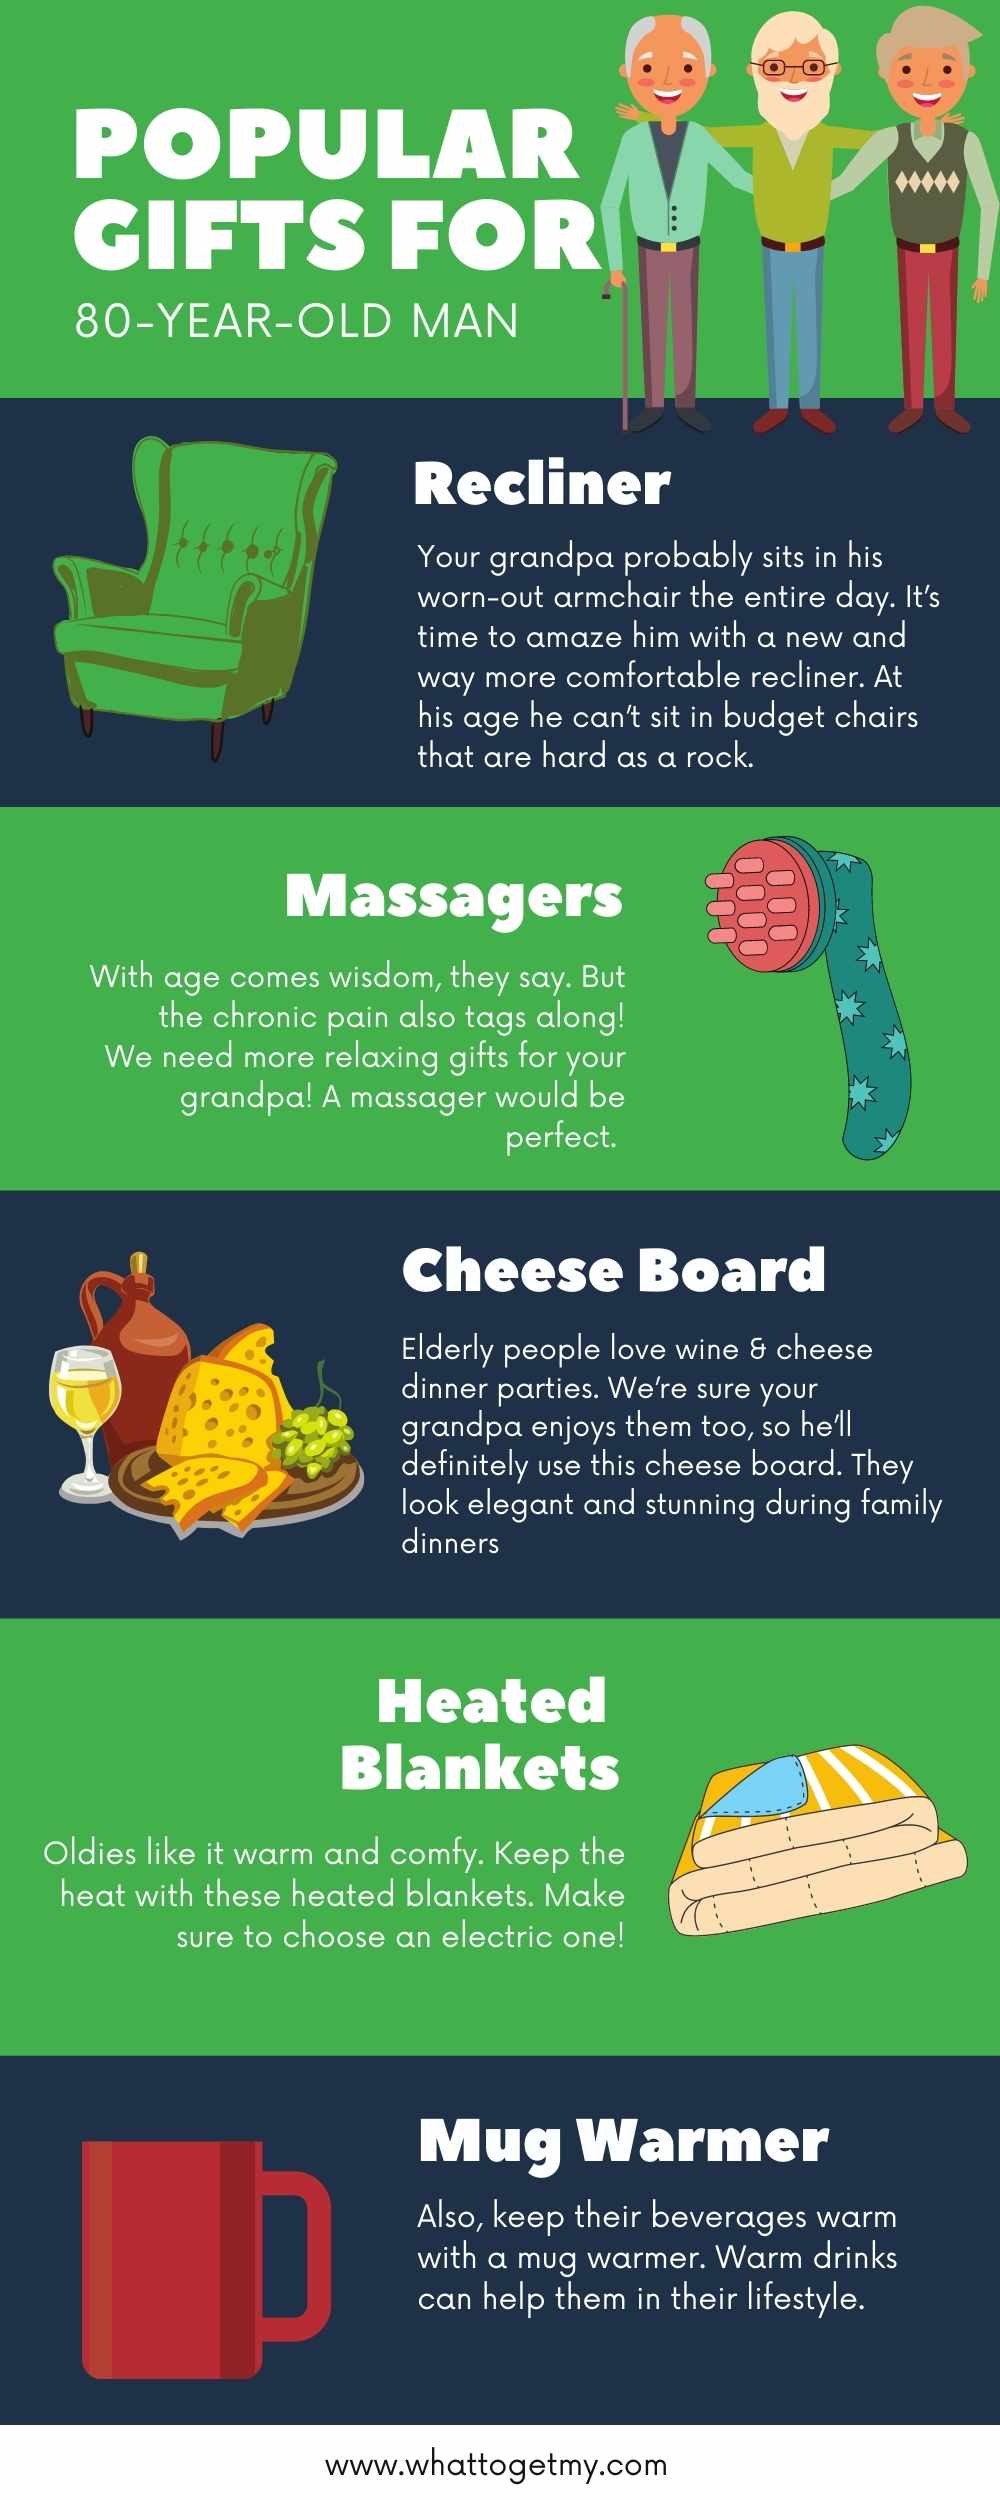 Popular Gifts for 80 Year Old Man